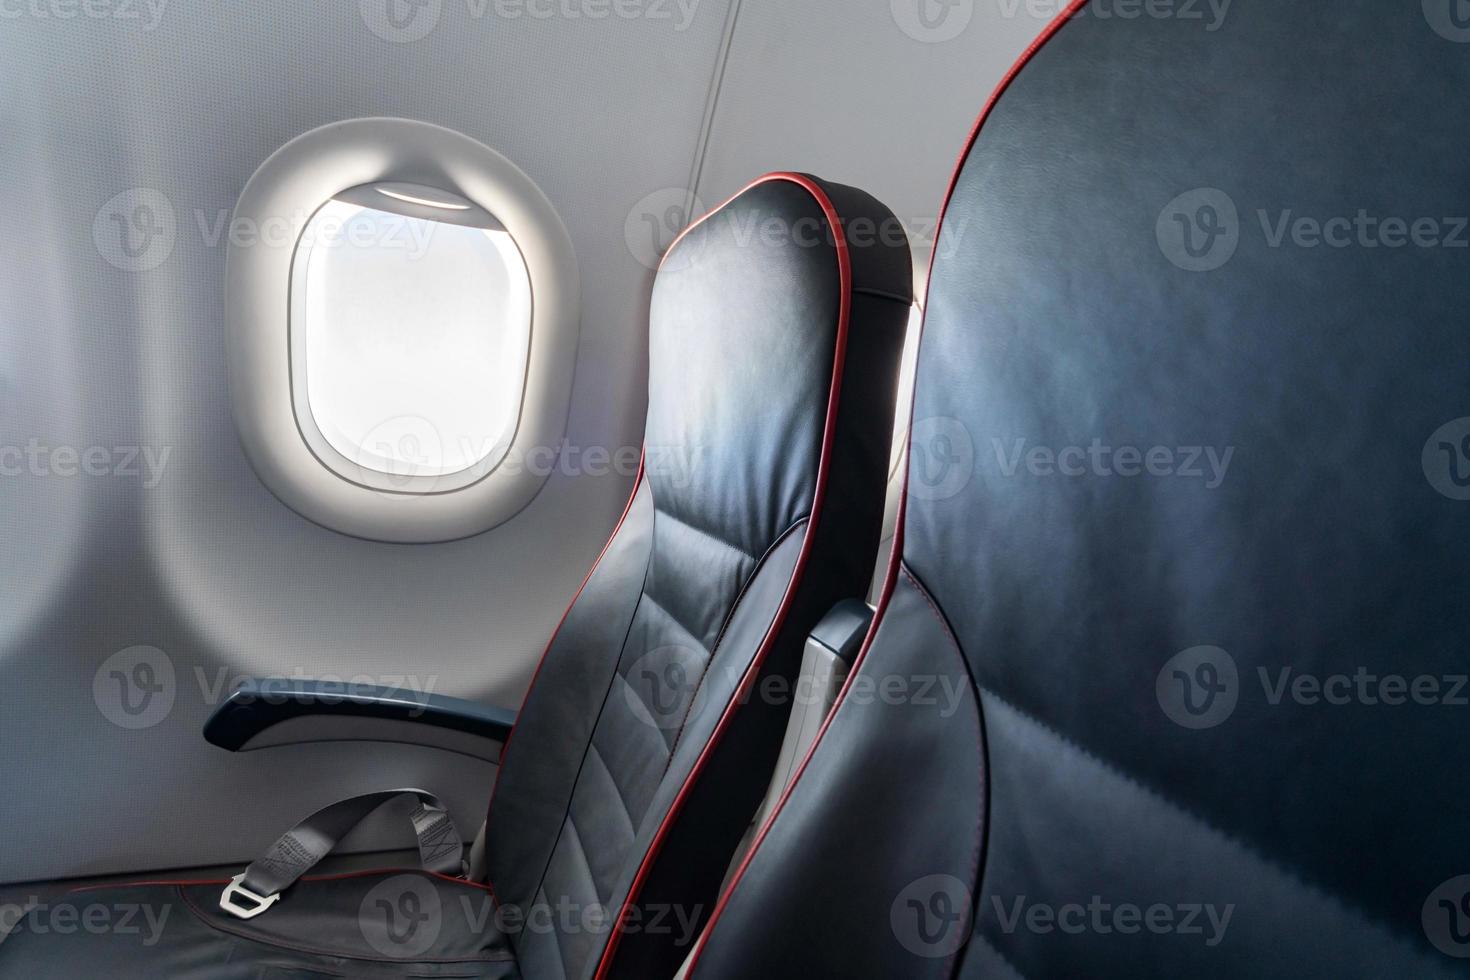 Airplane seats and windows. Economy class comfortable seats without passengers. New low-cost carrier airline photo